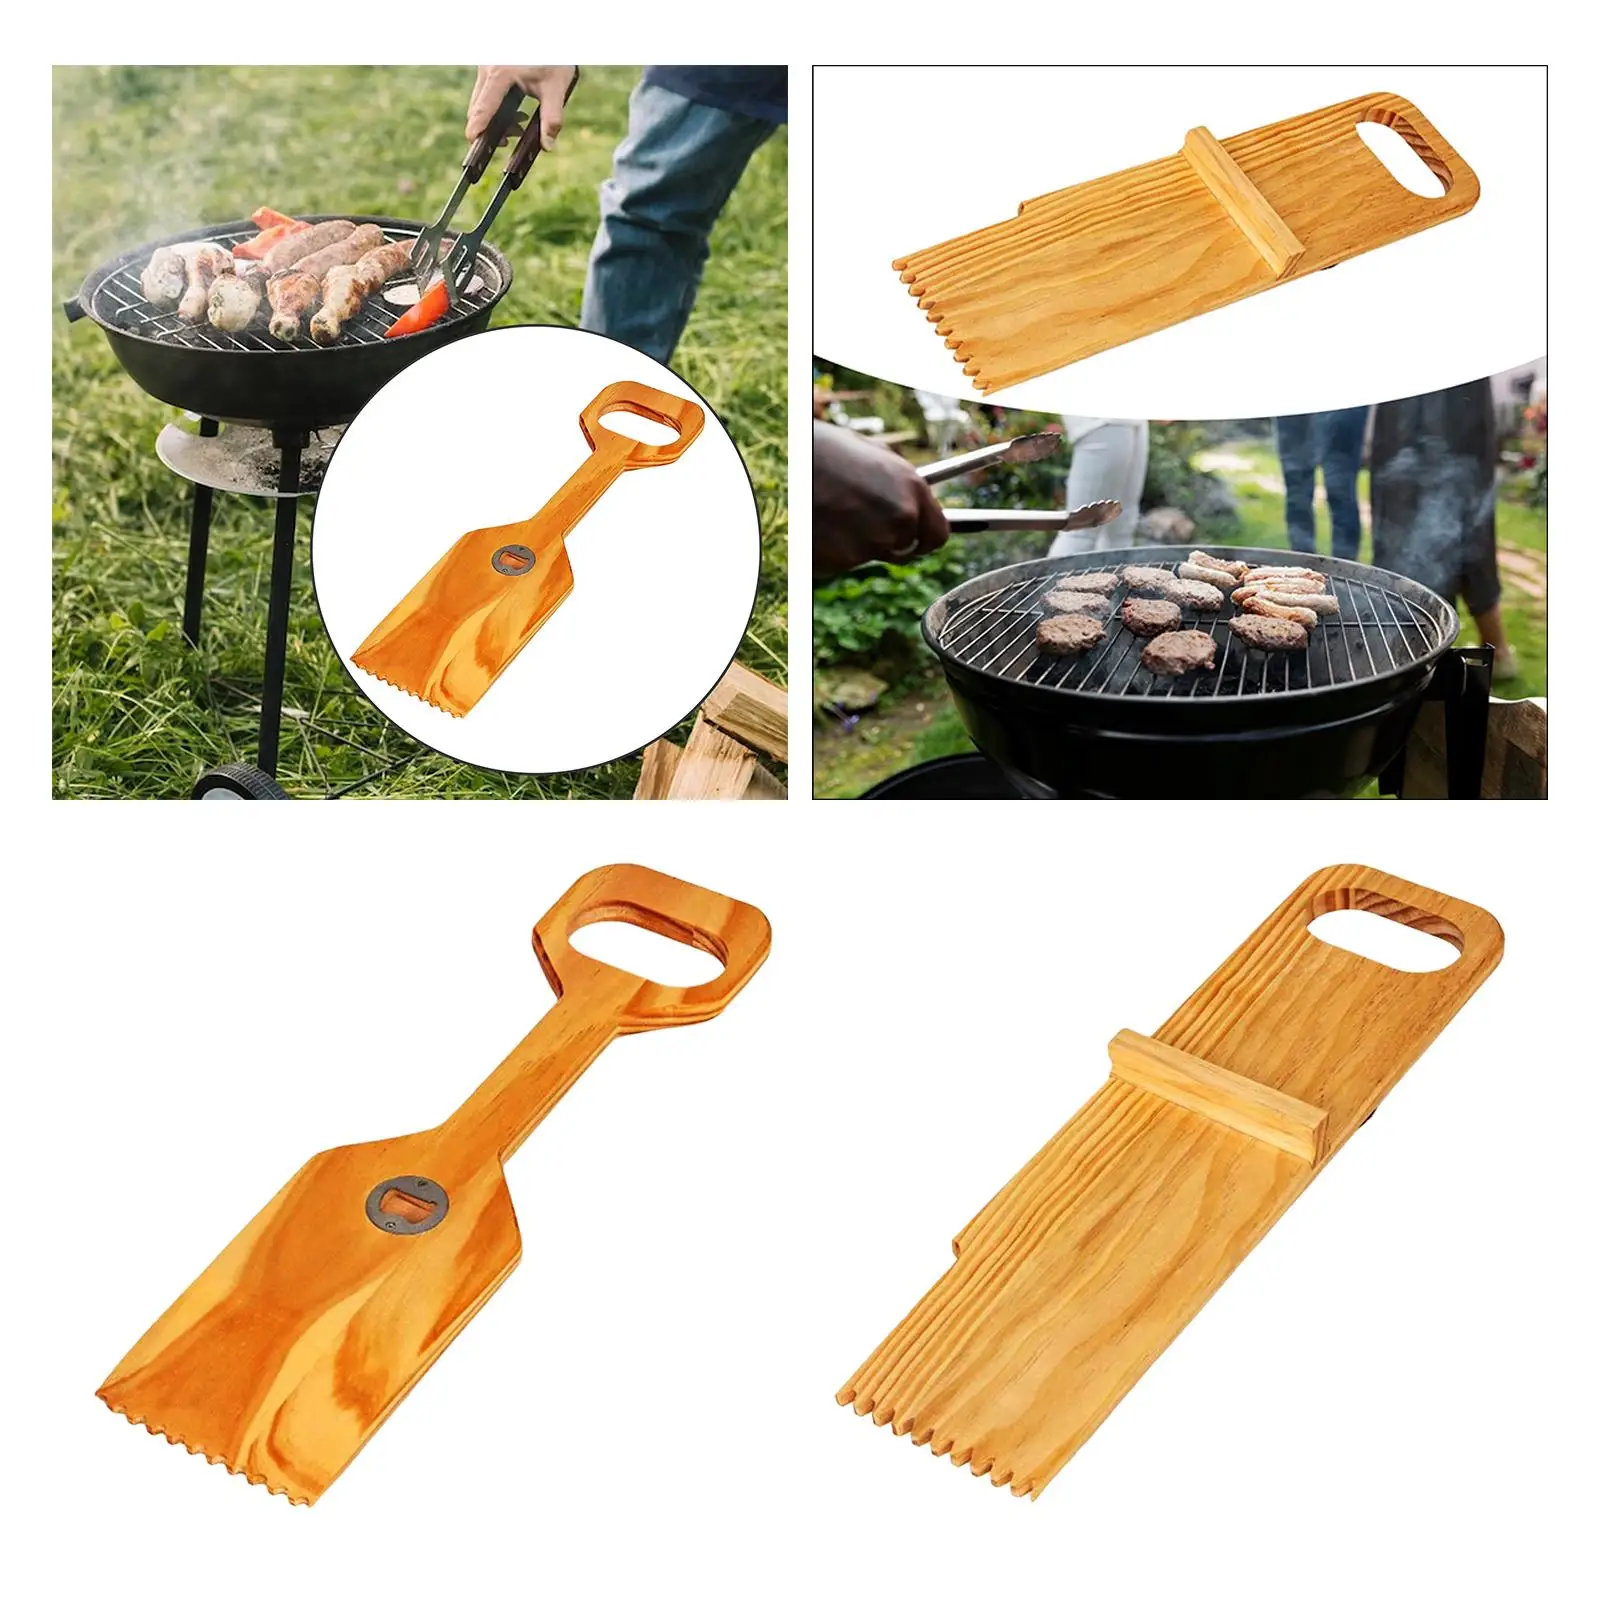 Cooking Spatula Flat Kitchen Serving Tools Durable Heat Resistant Barbecue Turners Grill Utensils for Frying Turning Flipping